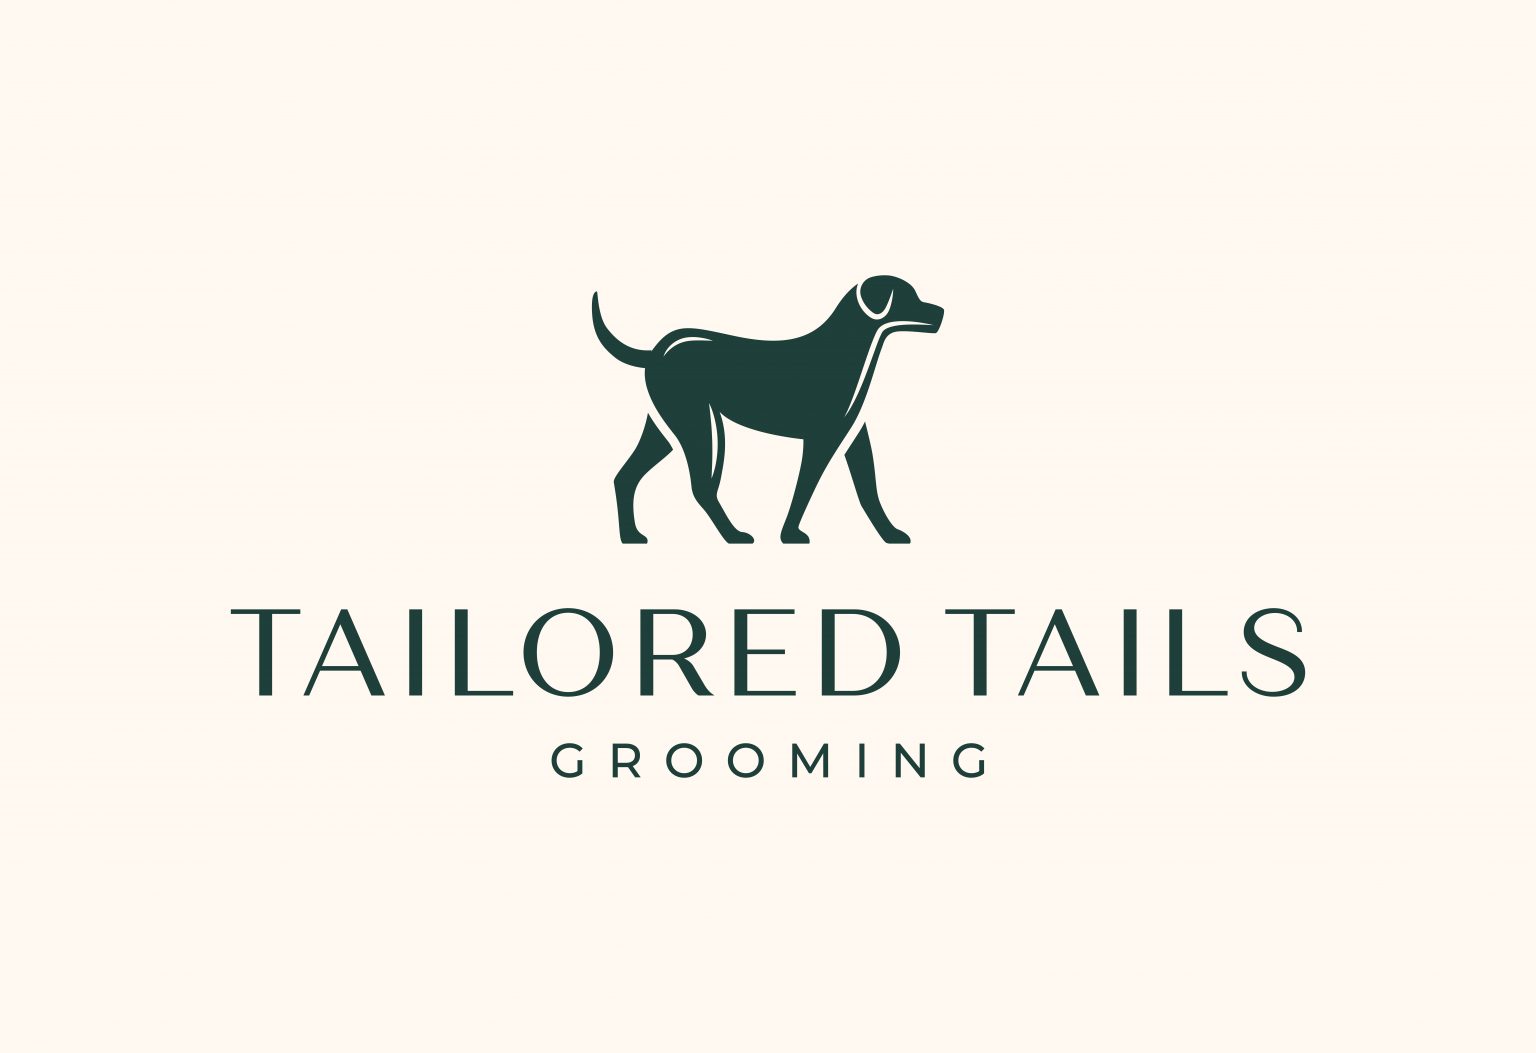 Tailored Tails Grooming Logo v2